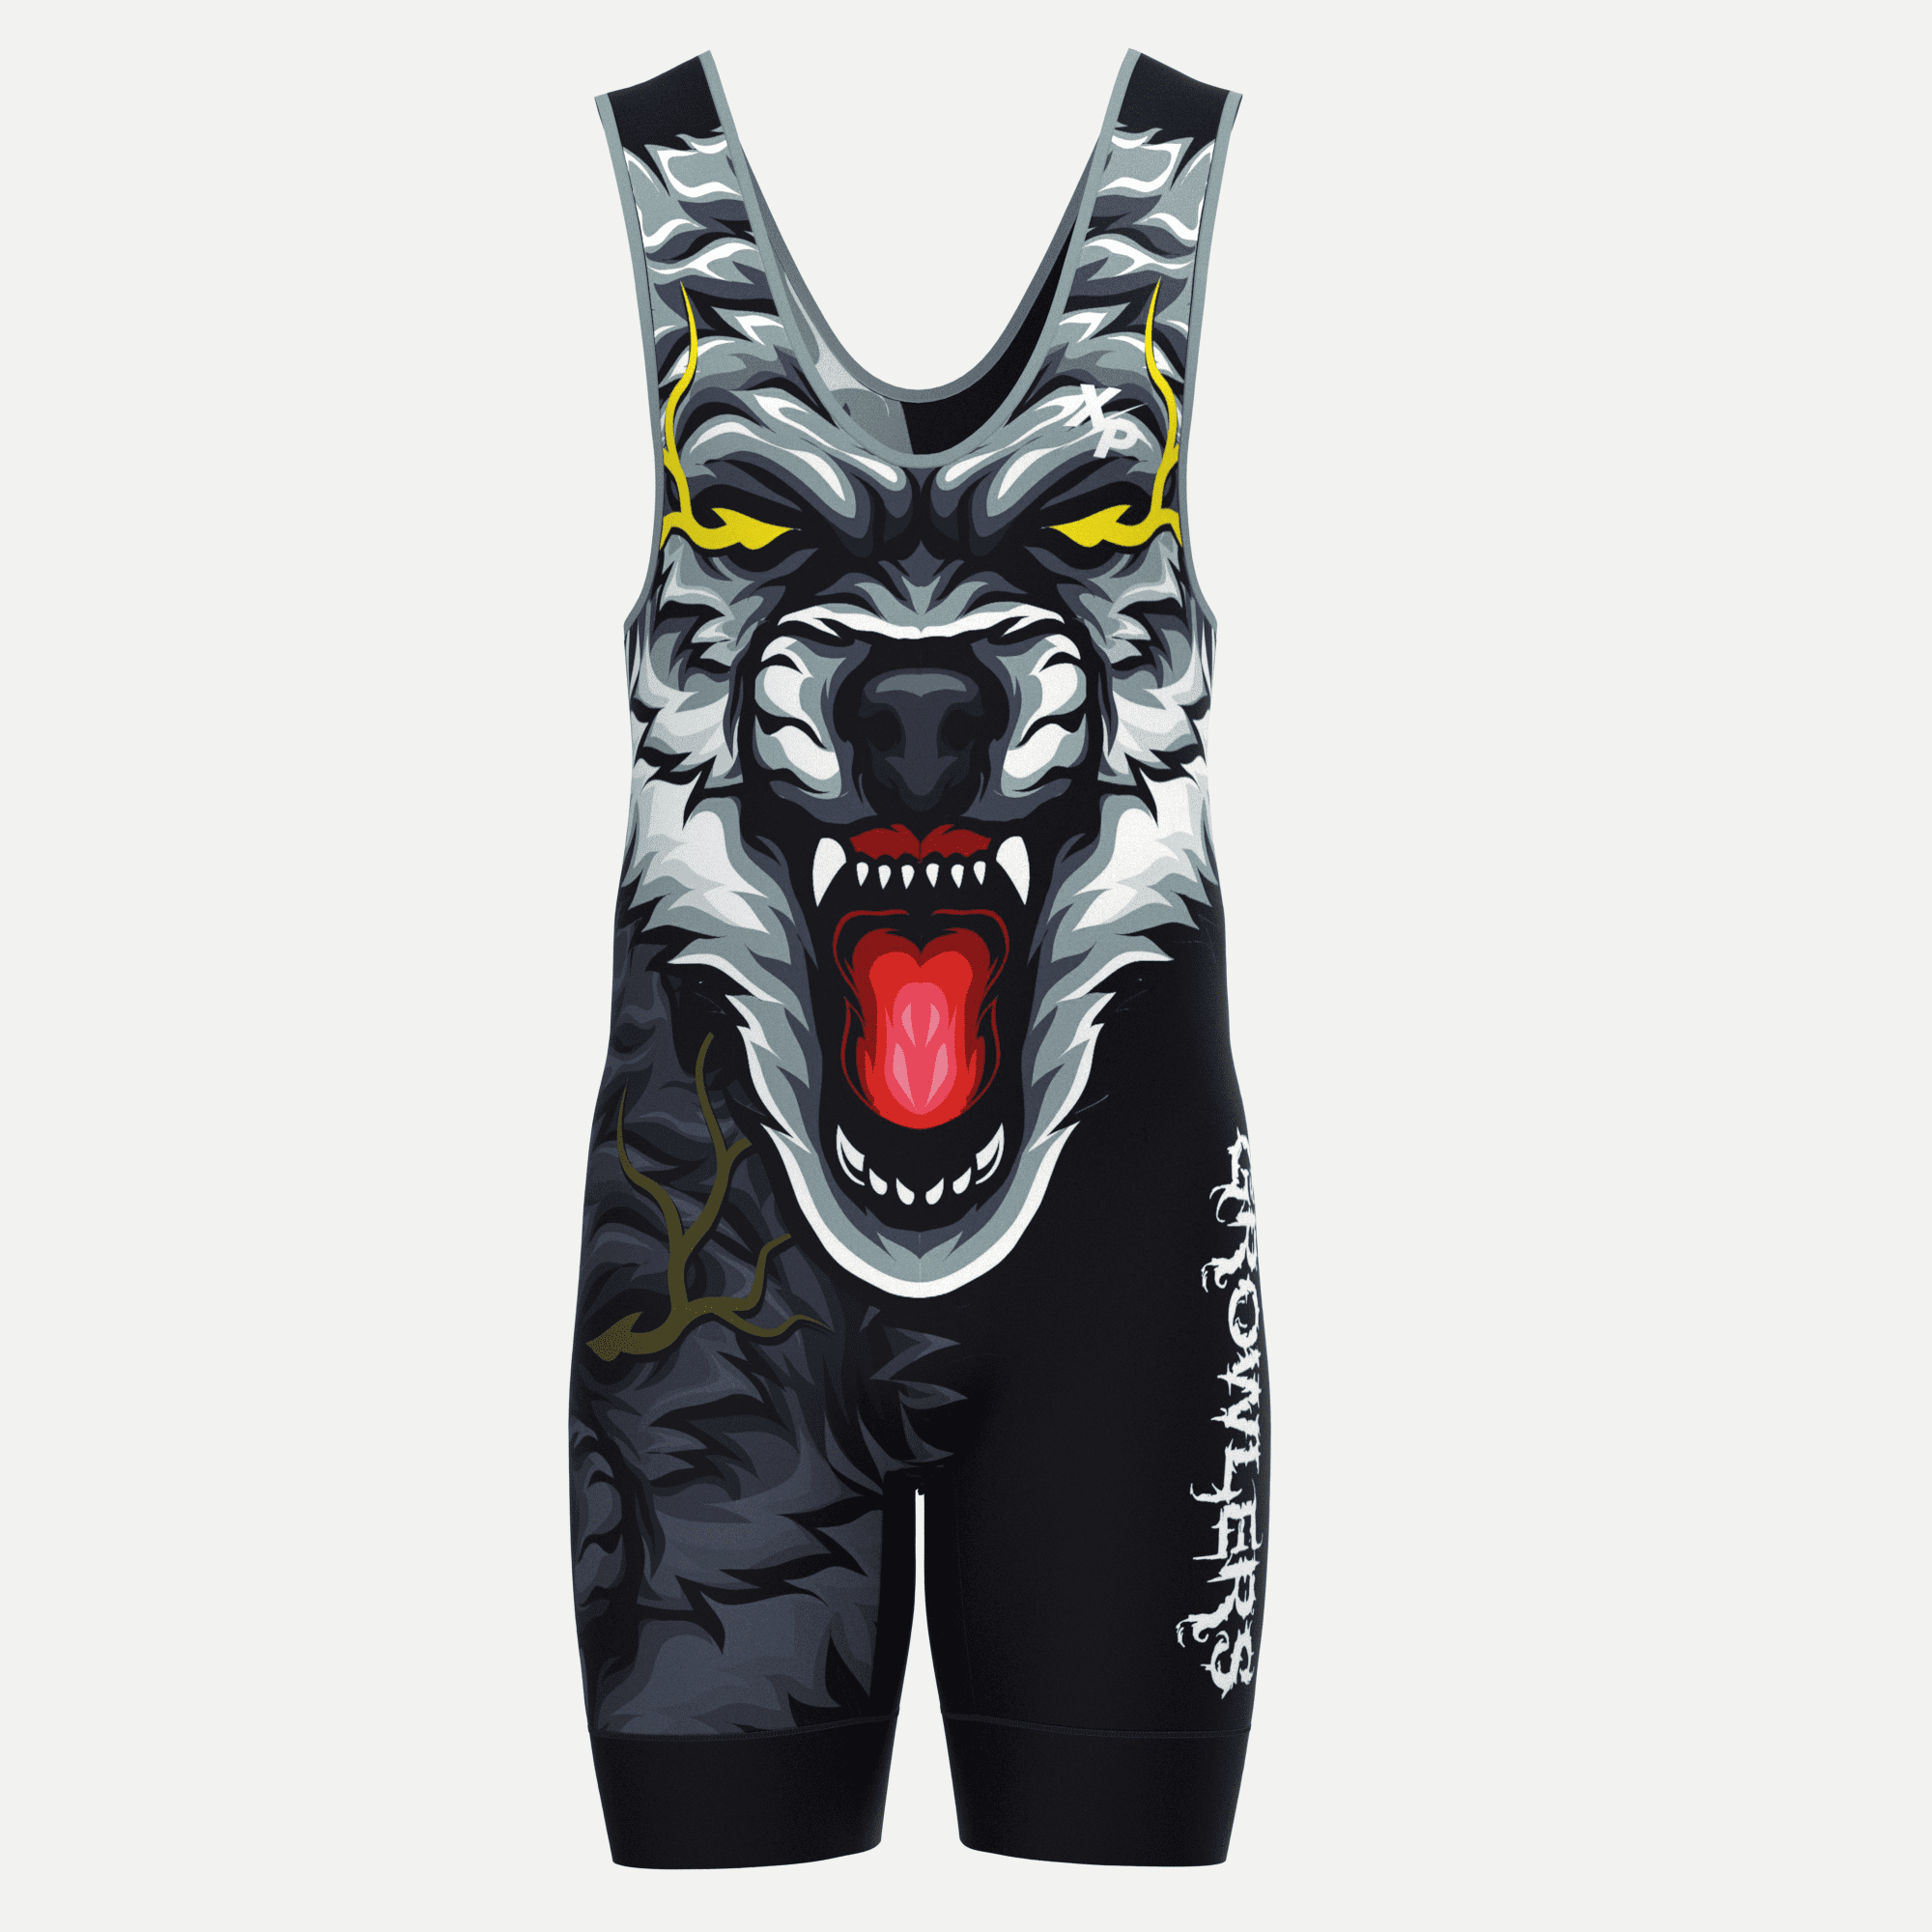 Growlers Wrestling Singlet Xtreme Pro Apparel